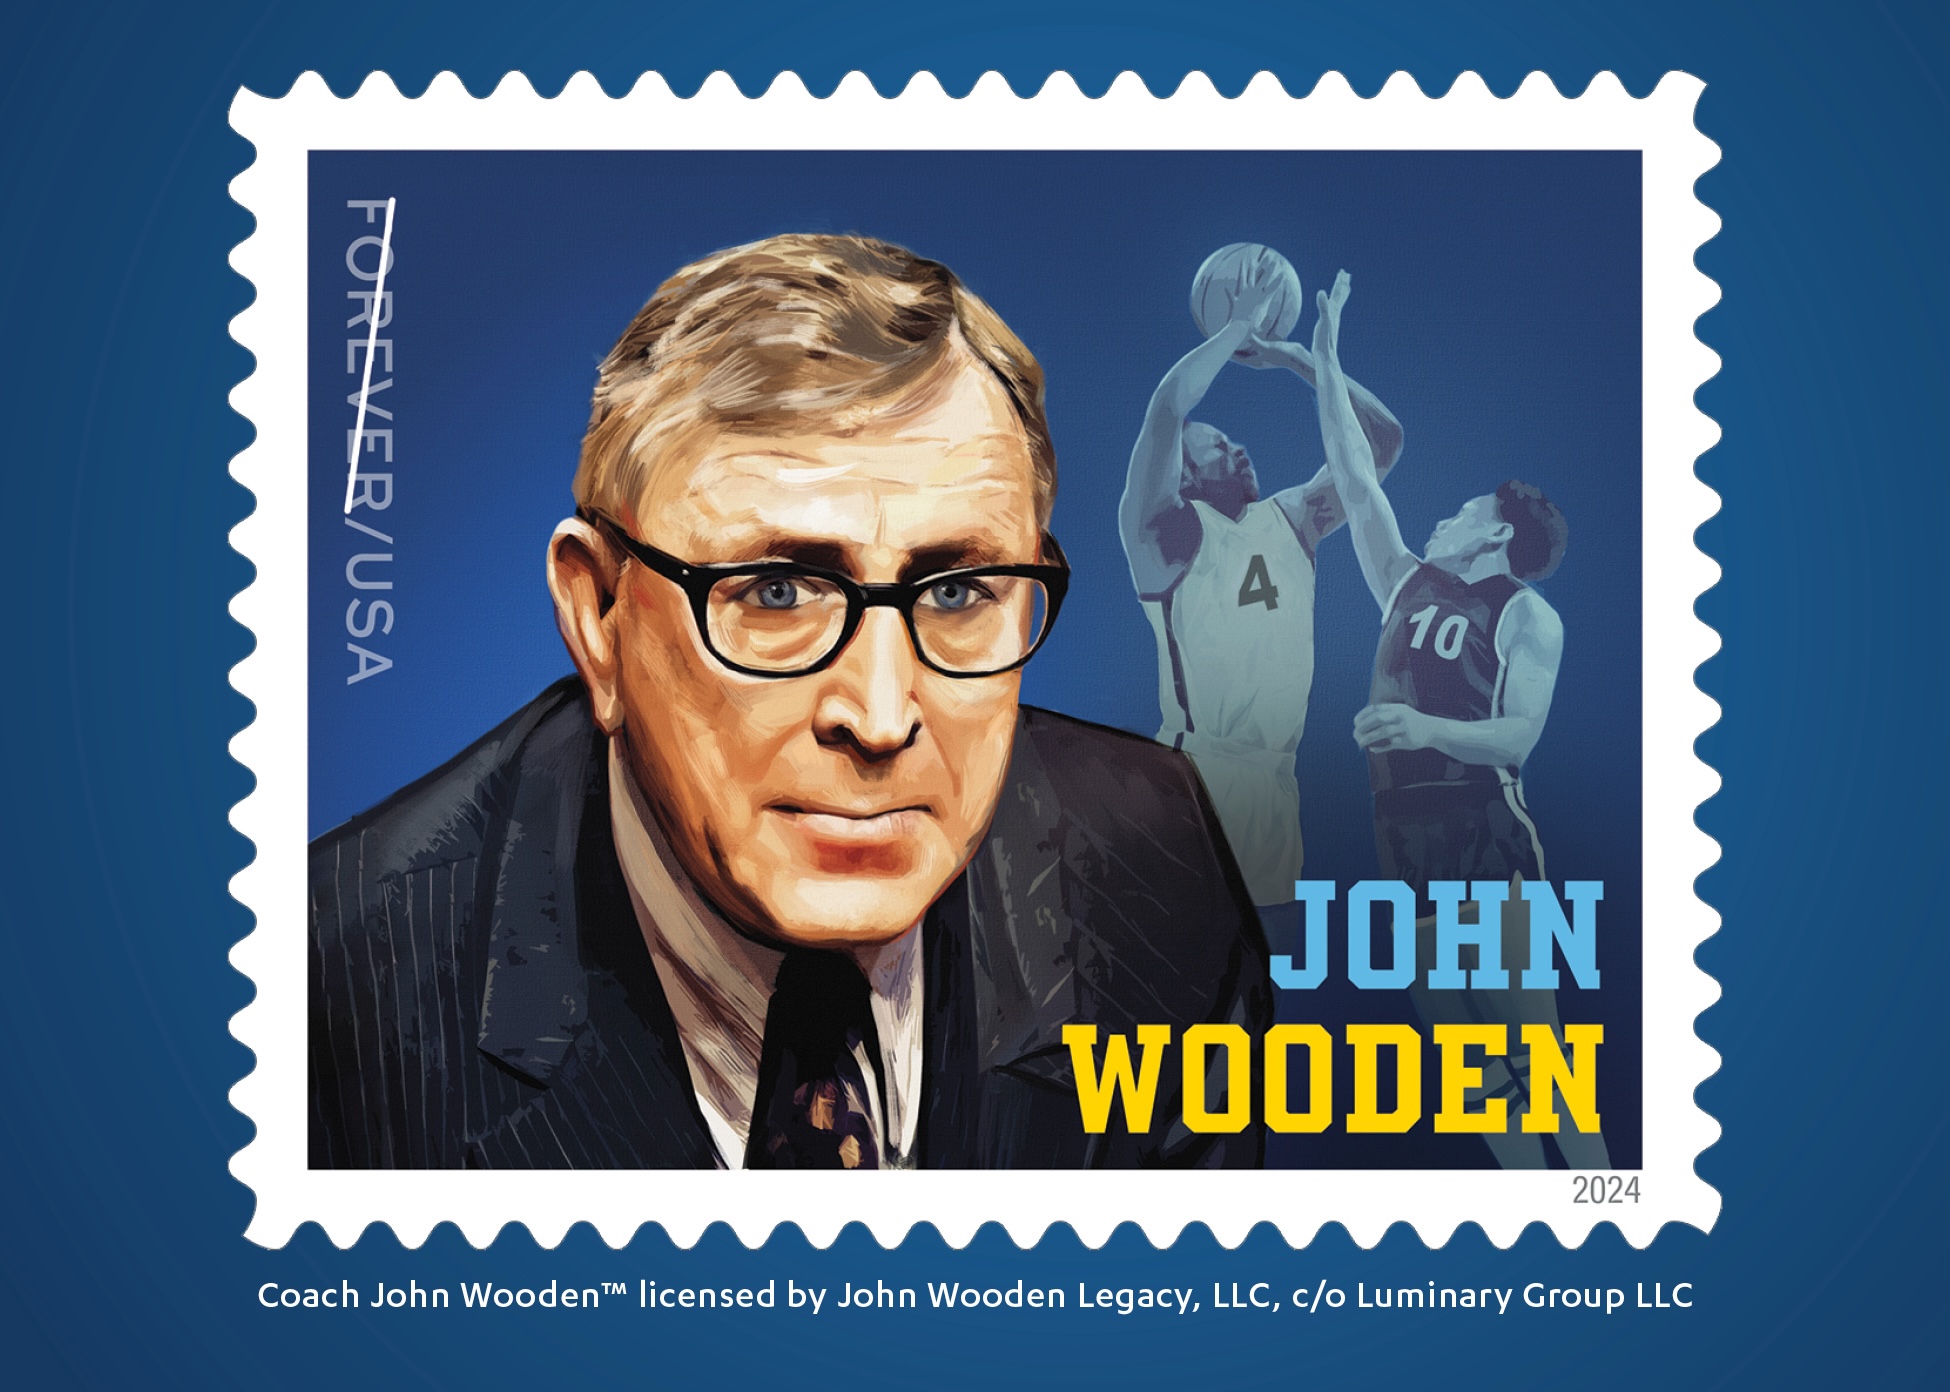 Image of US Postal Stamp with John Wooden&#039;s face and two basketball players in the back.